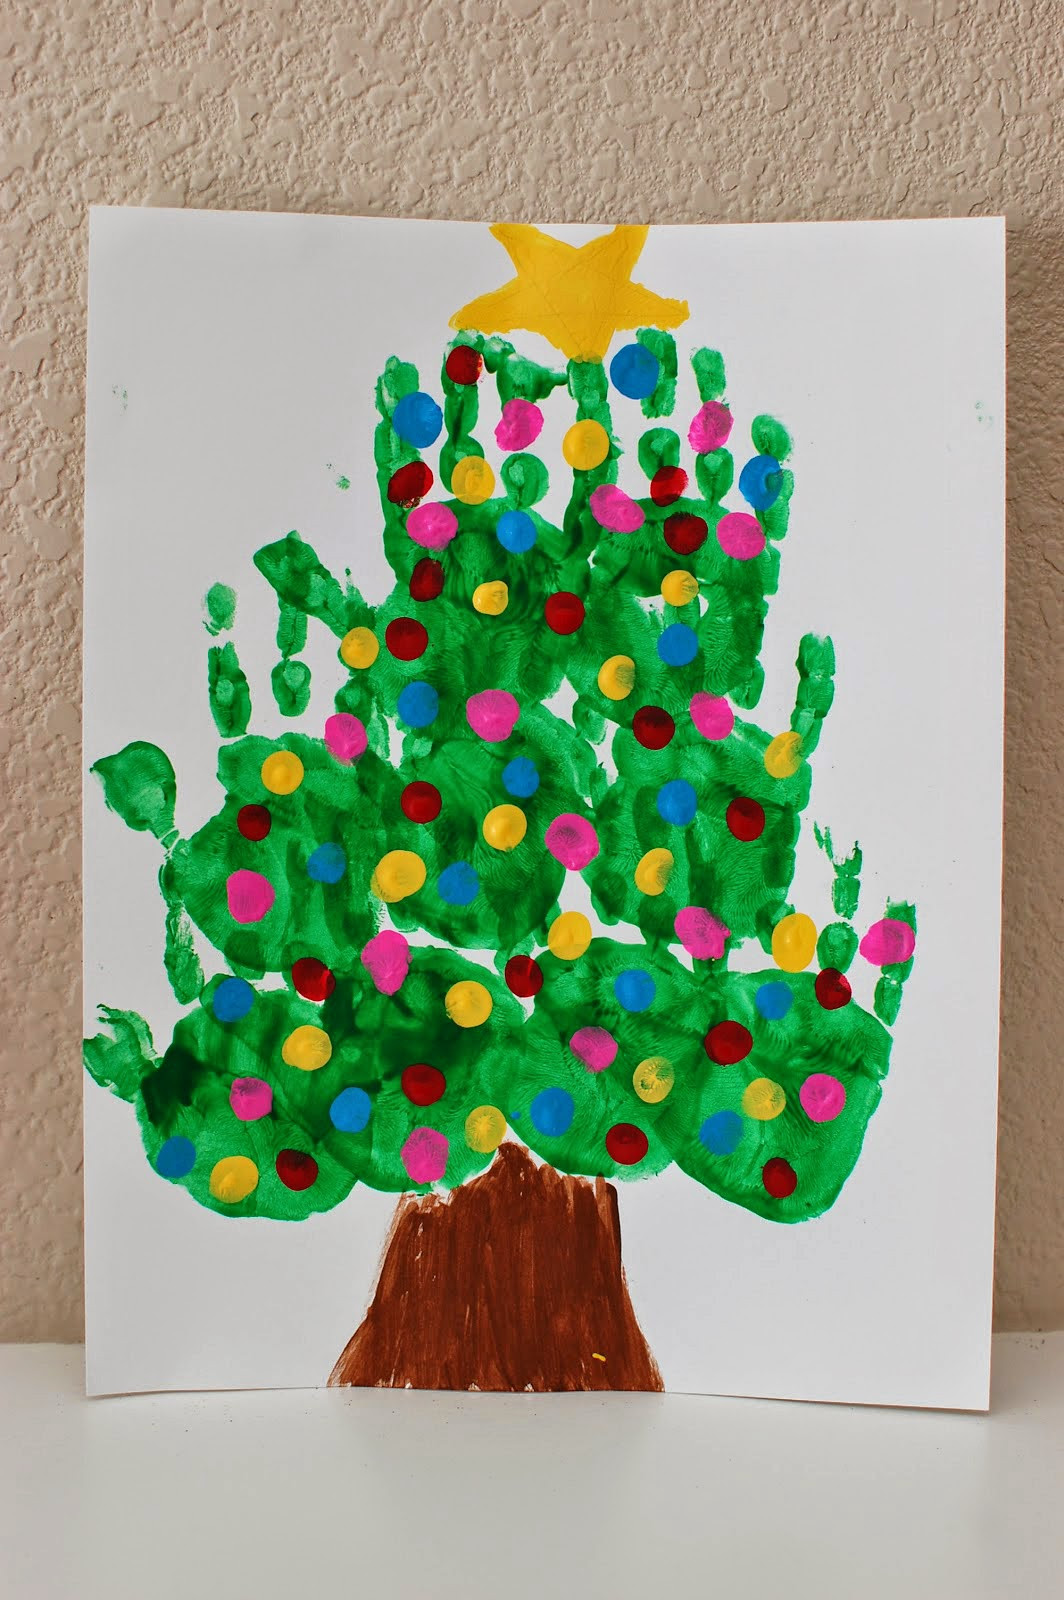 Childrens Christmas Craft Ideas
 20 of the Cutest Christmas Handprint Crafts for Kids